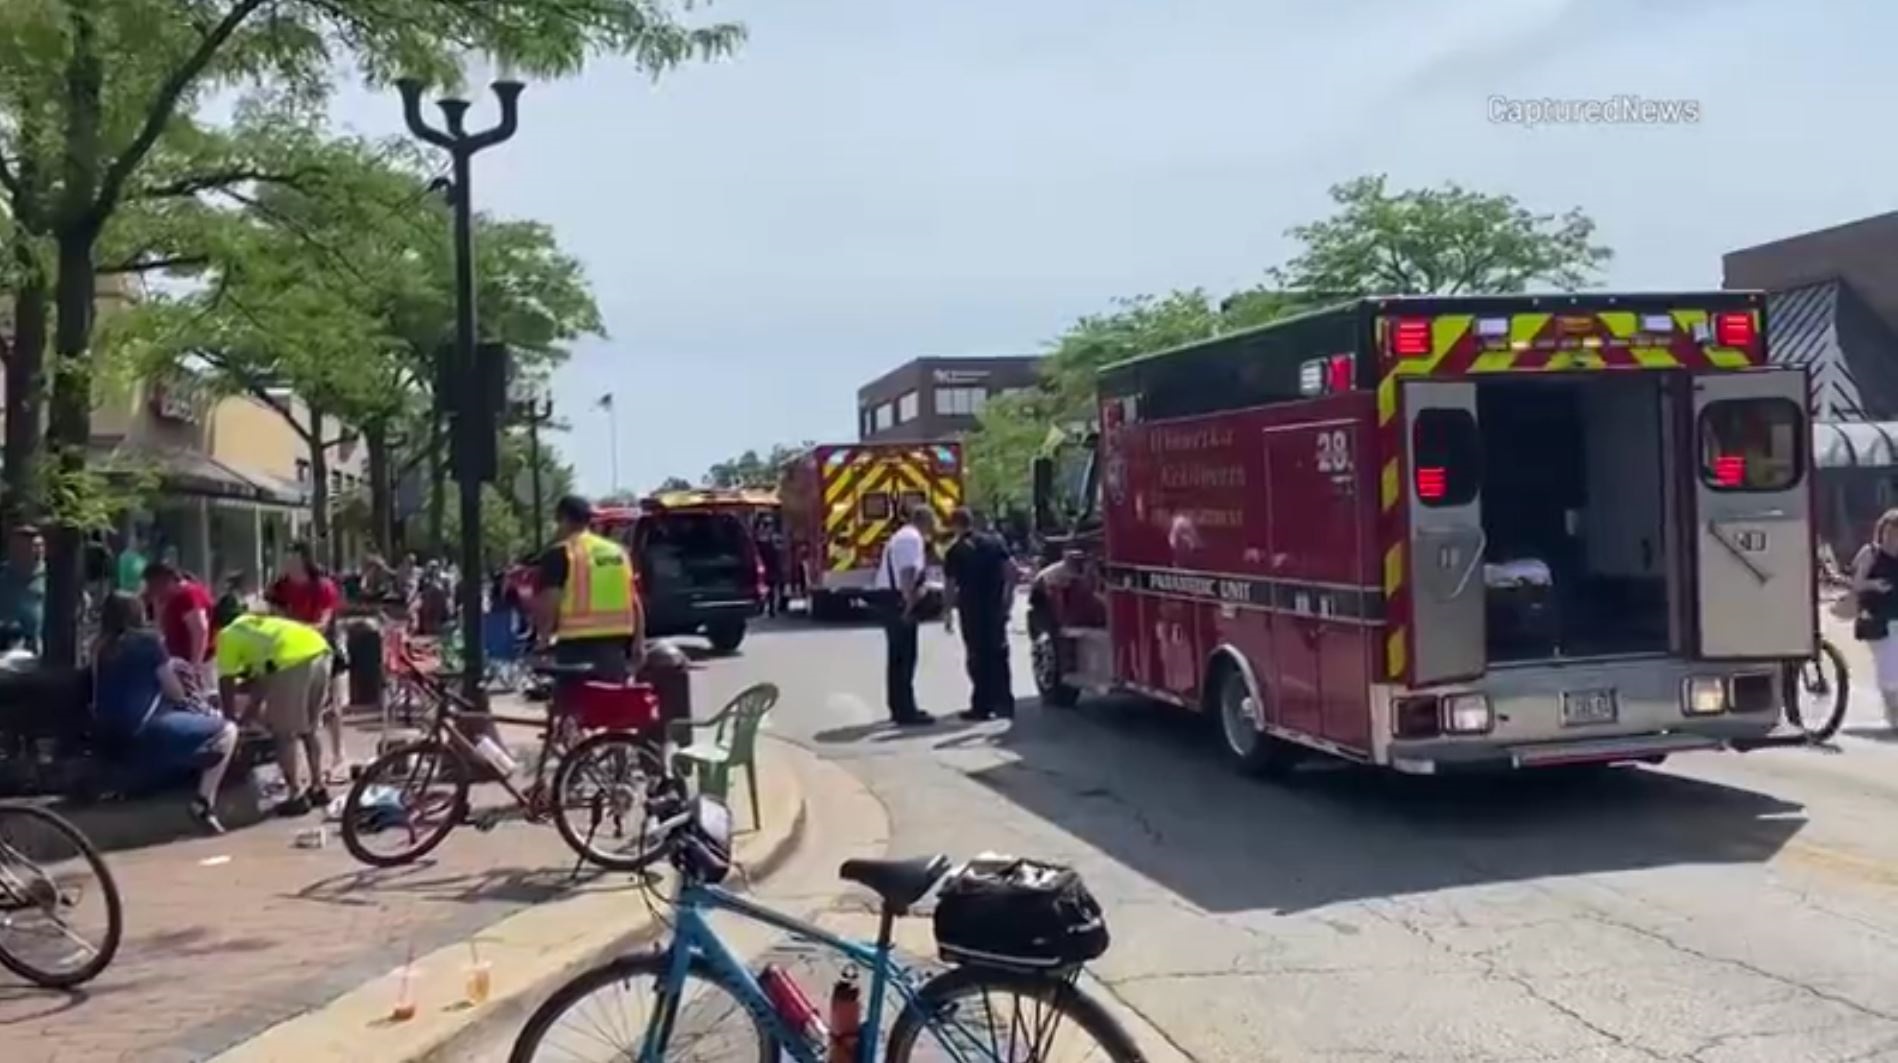 Six dead in shooting in Chicago Fourth of July parade – Video